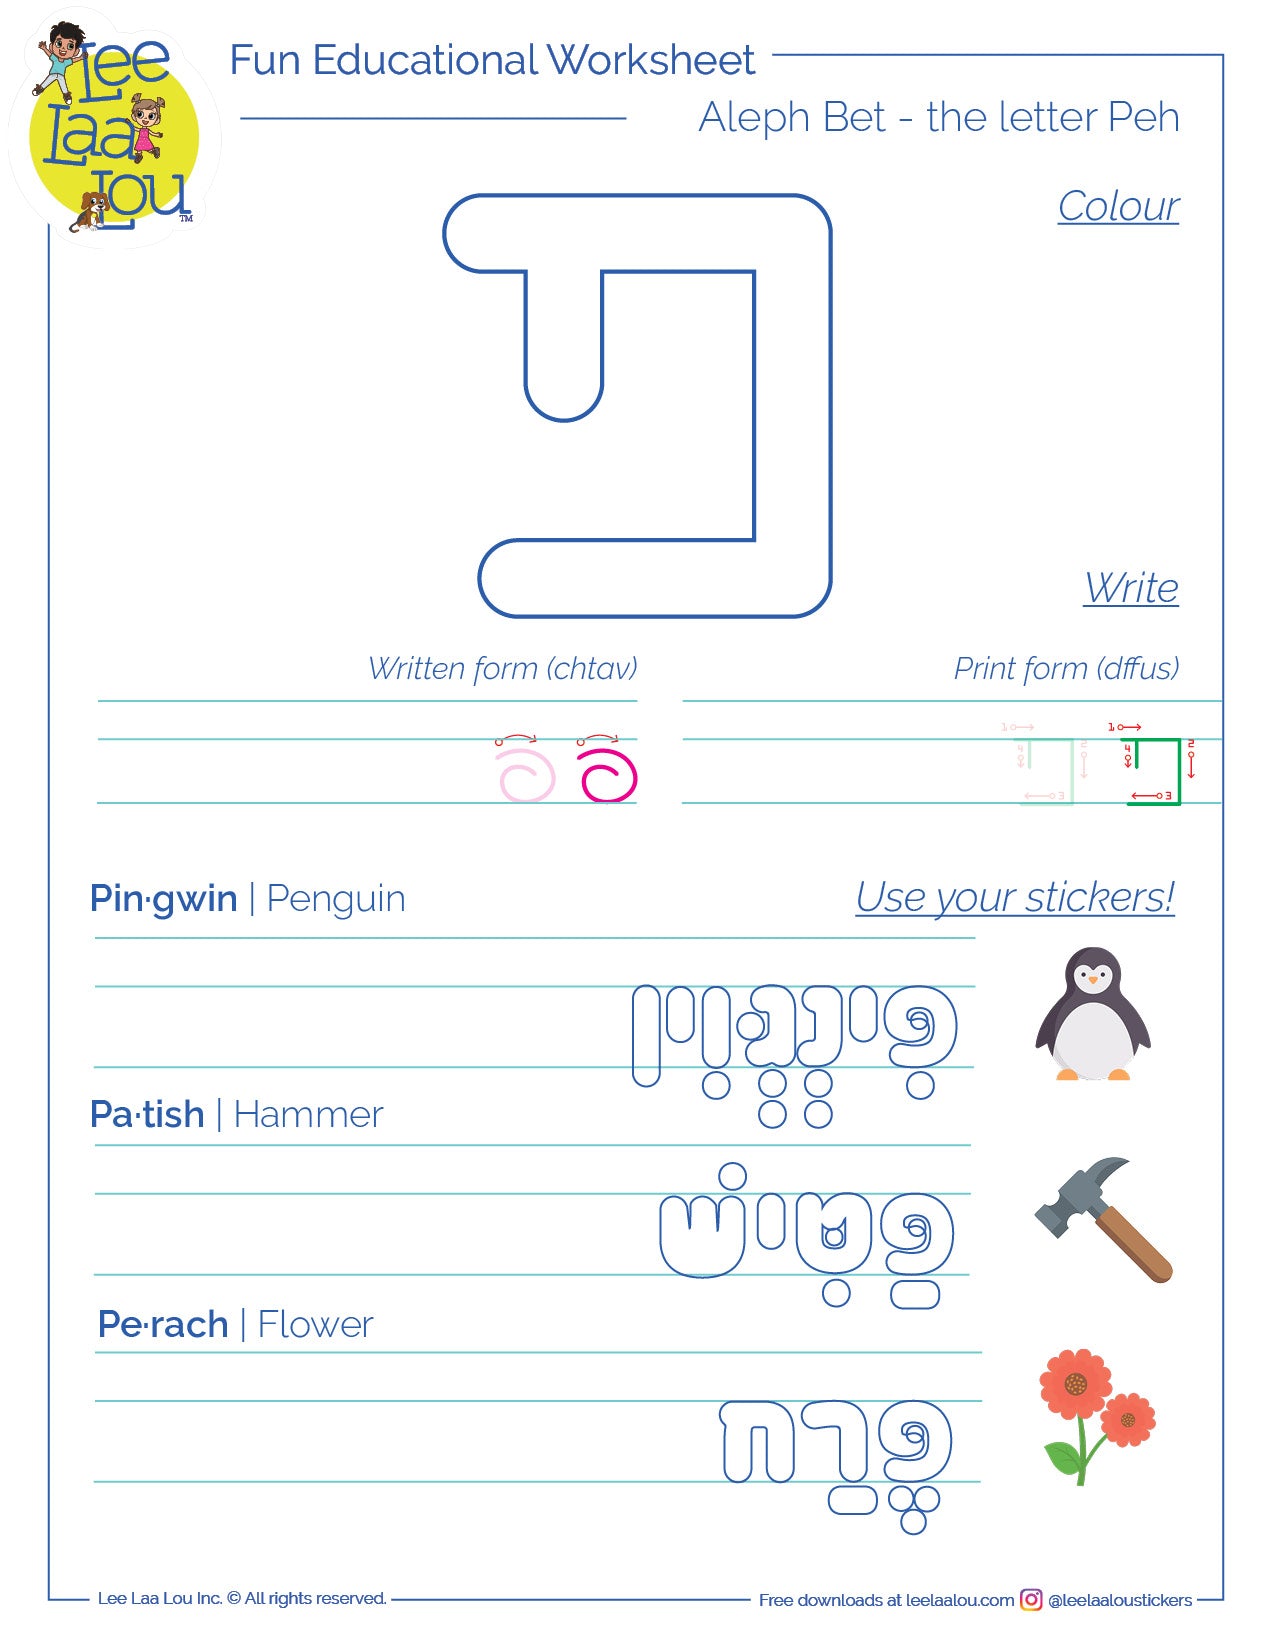 The 17th letter of the Hebrew alphabet - peh - activity sheet - האות פא דף עבודה